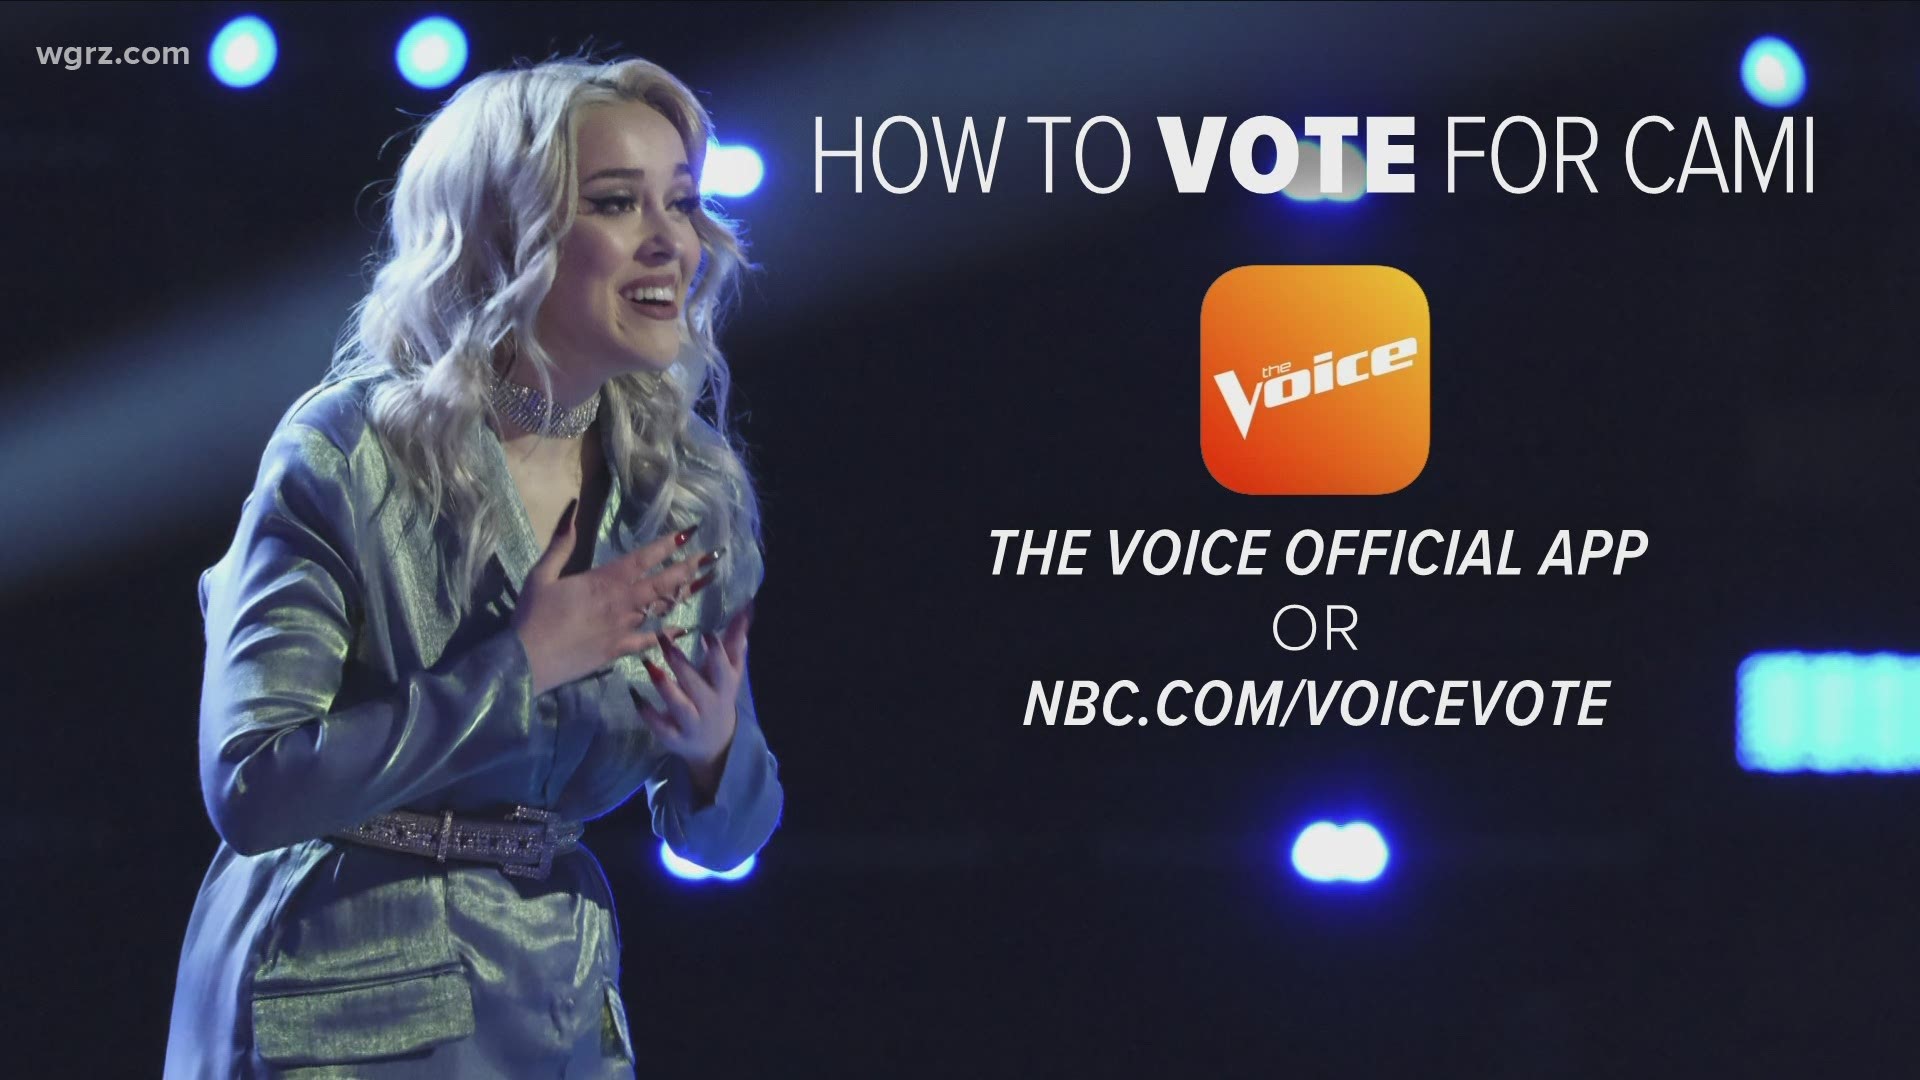 Nbc Voice Vote Online How To Vote For The Voice 2020 Finalists